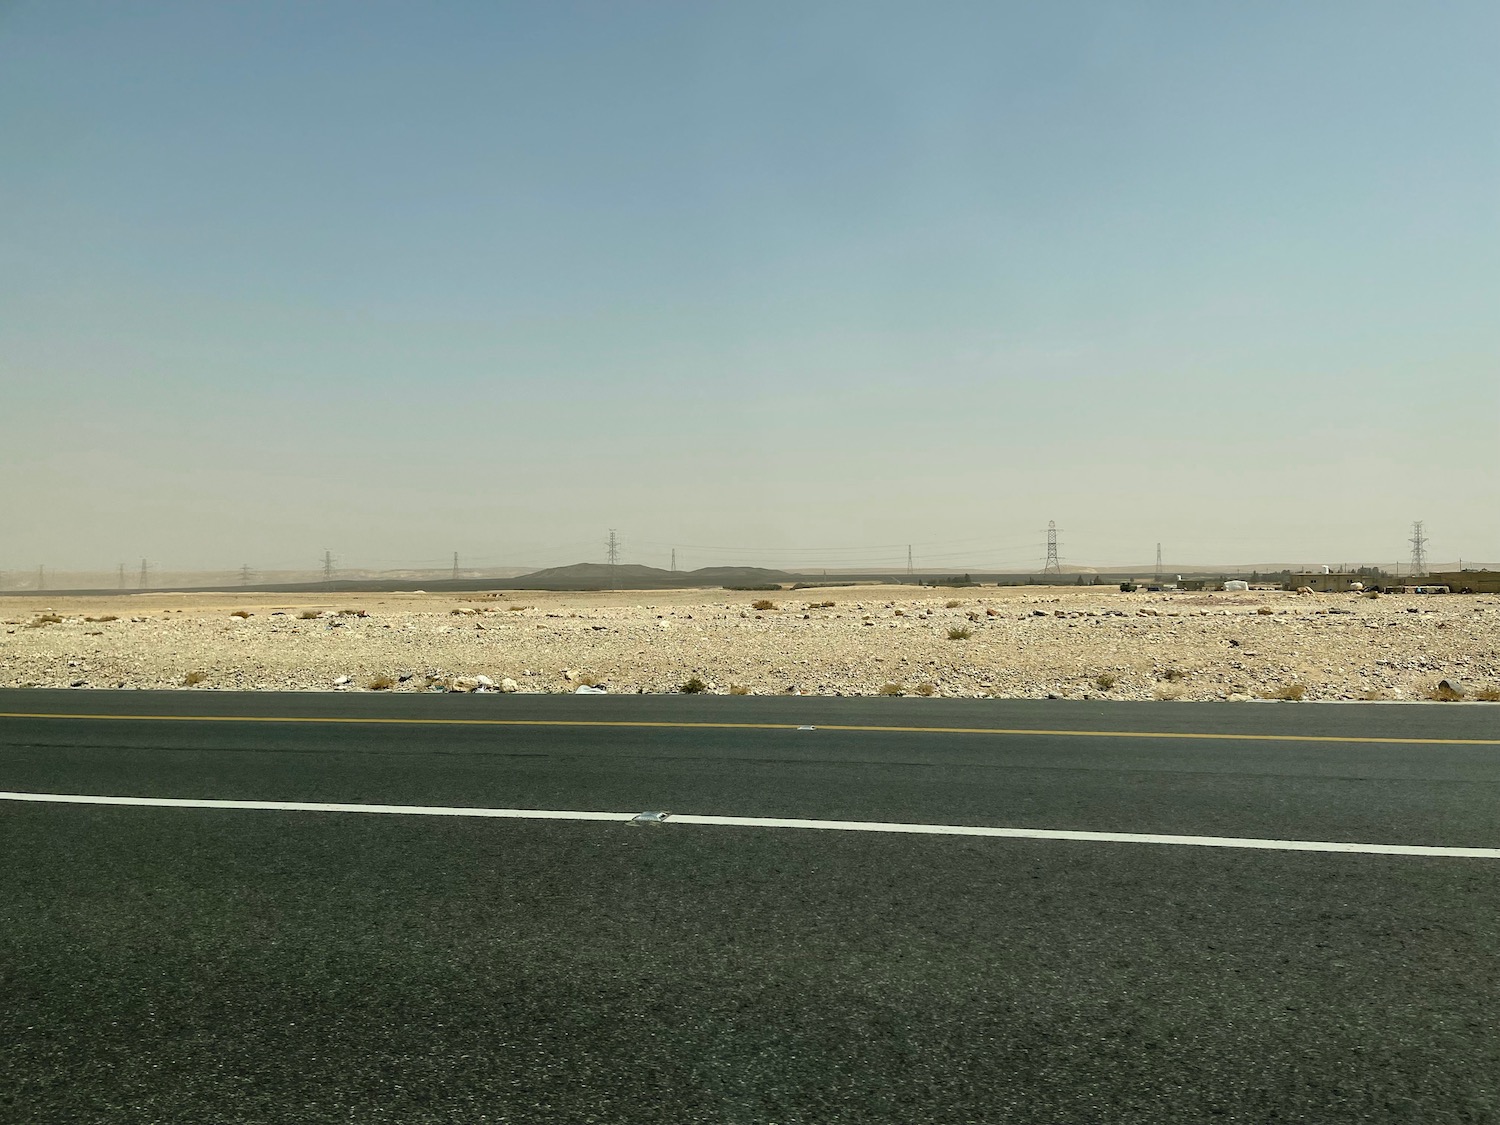 a road with a desert landscape